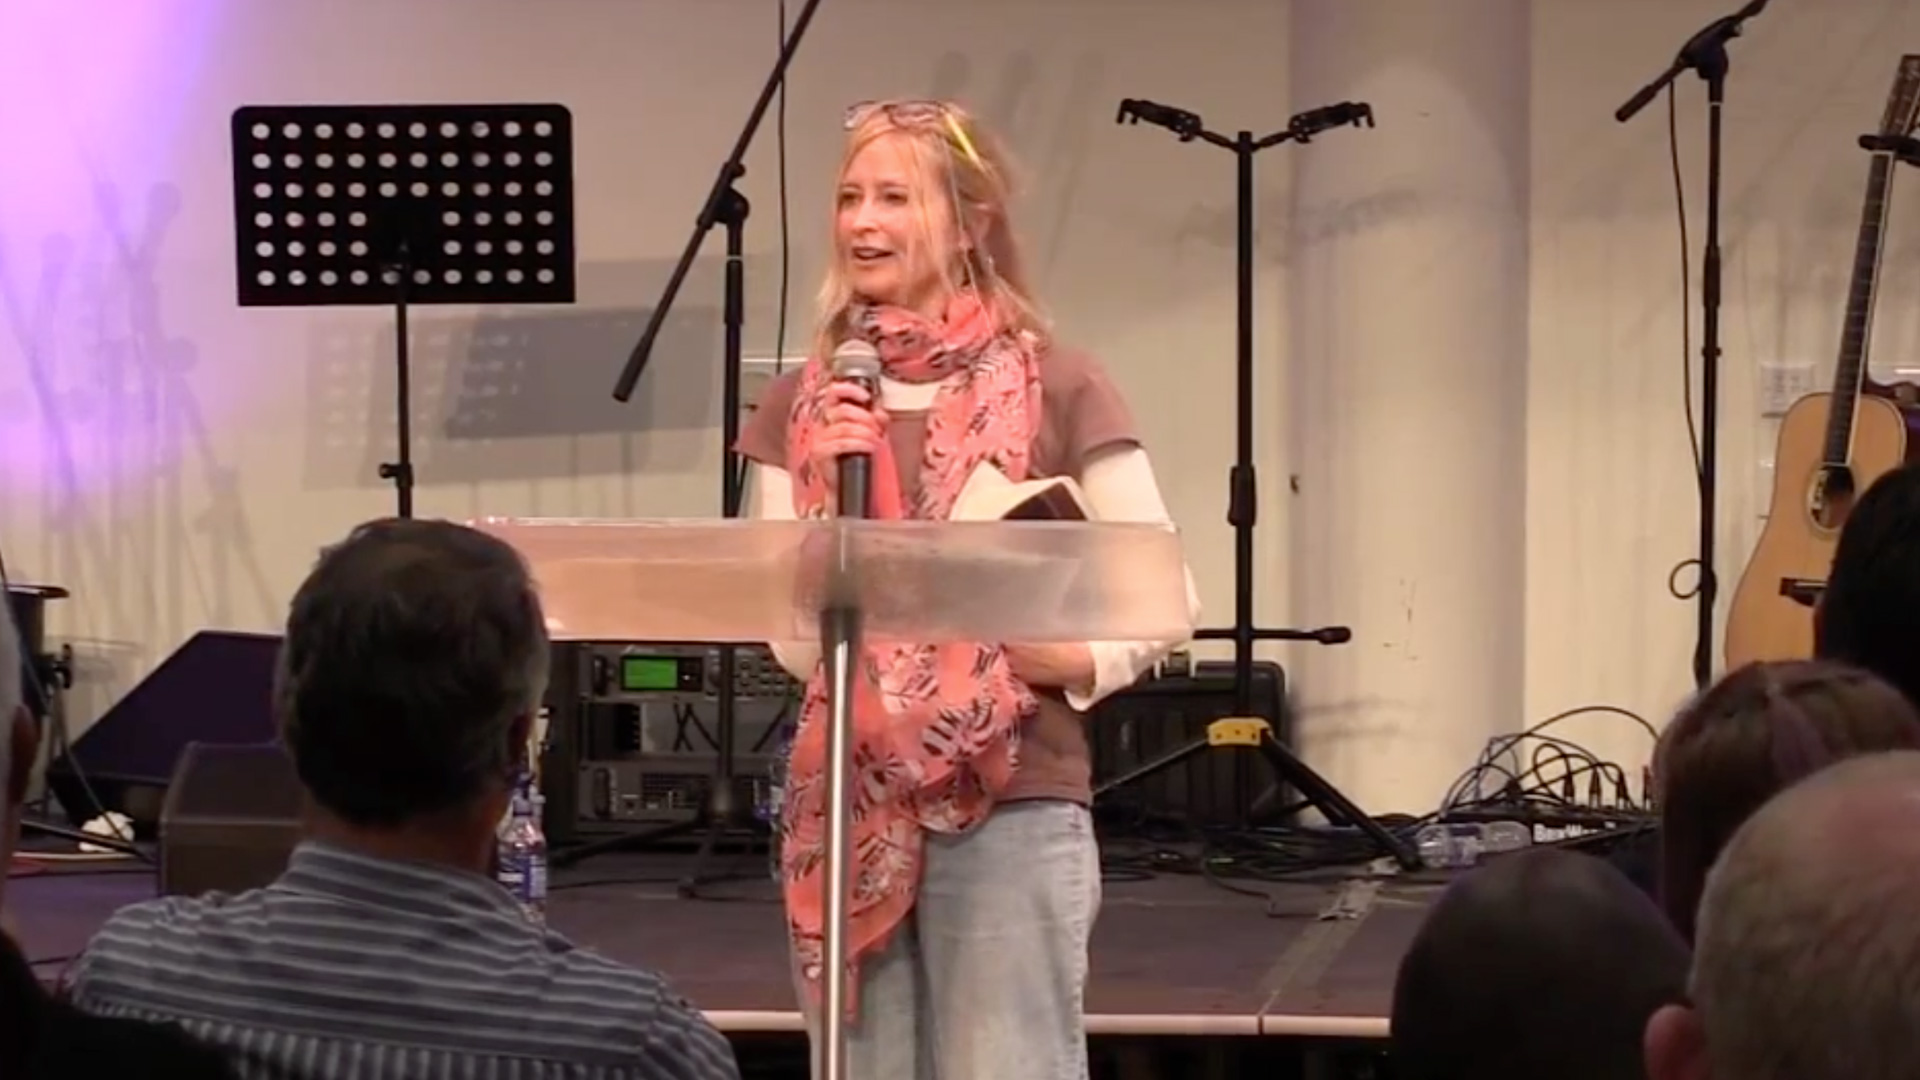 Video image for 2015 Four12 IOM Conference on 'The Word of GOd - No Longer Out of Duty' about loving the Word of God